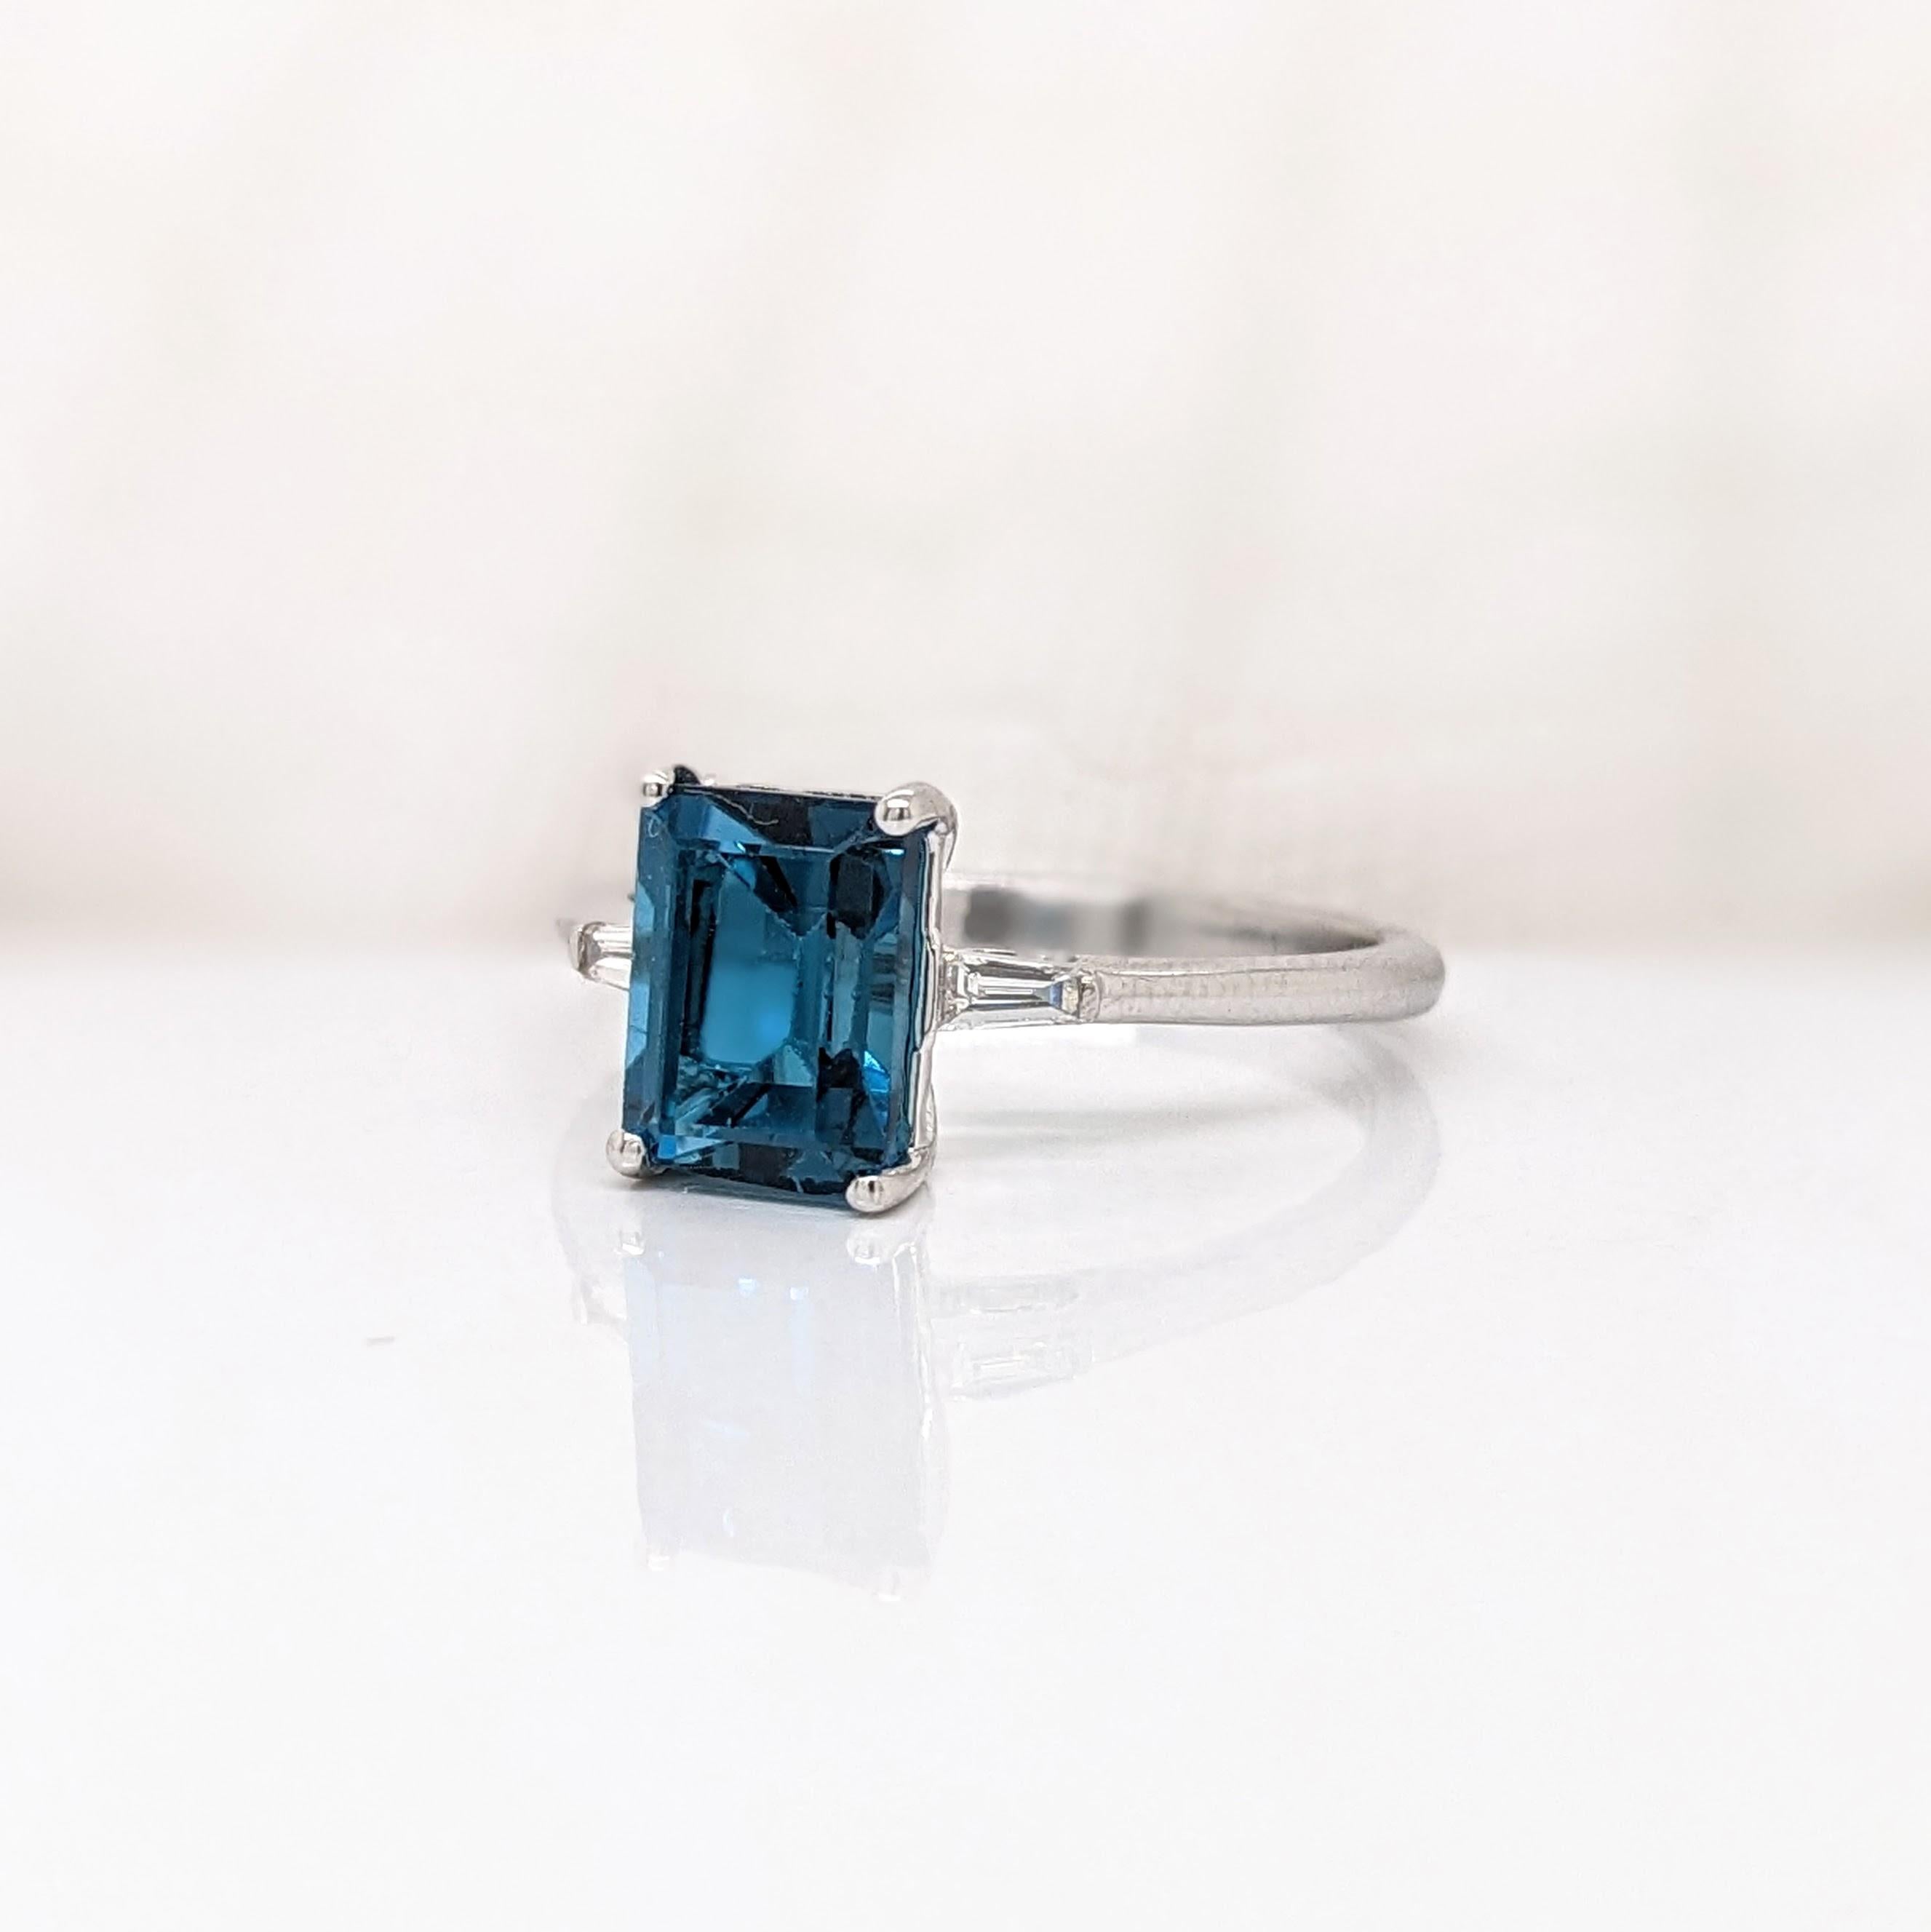 Emerald Cut 2.3ct London Blue Topaz Ring w Earth Mined Diamonds in Solid 14K Gold EM 8x6mm For Sale